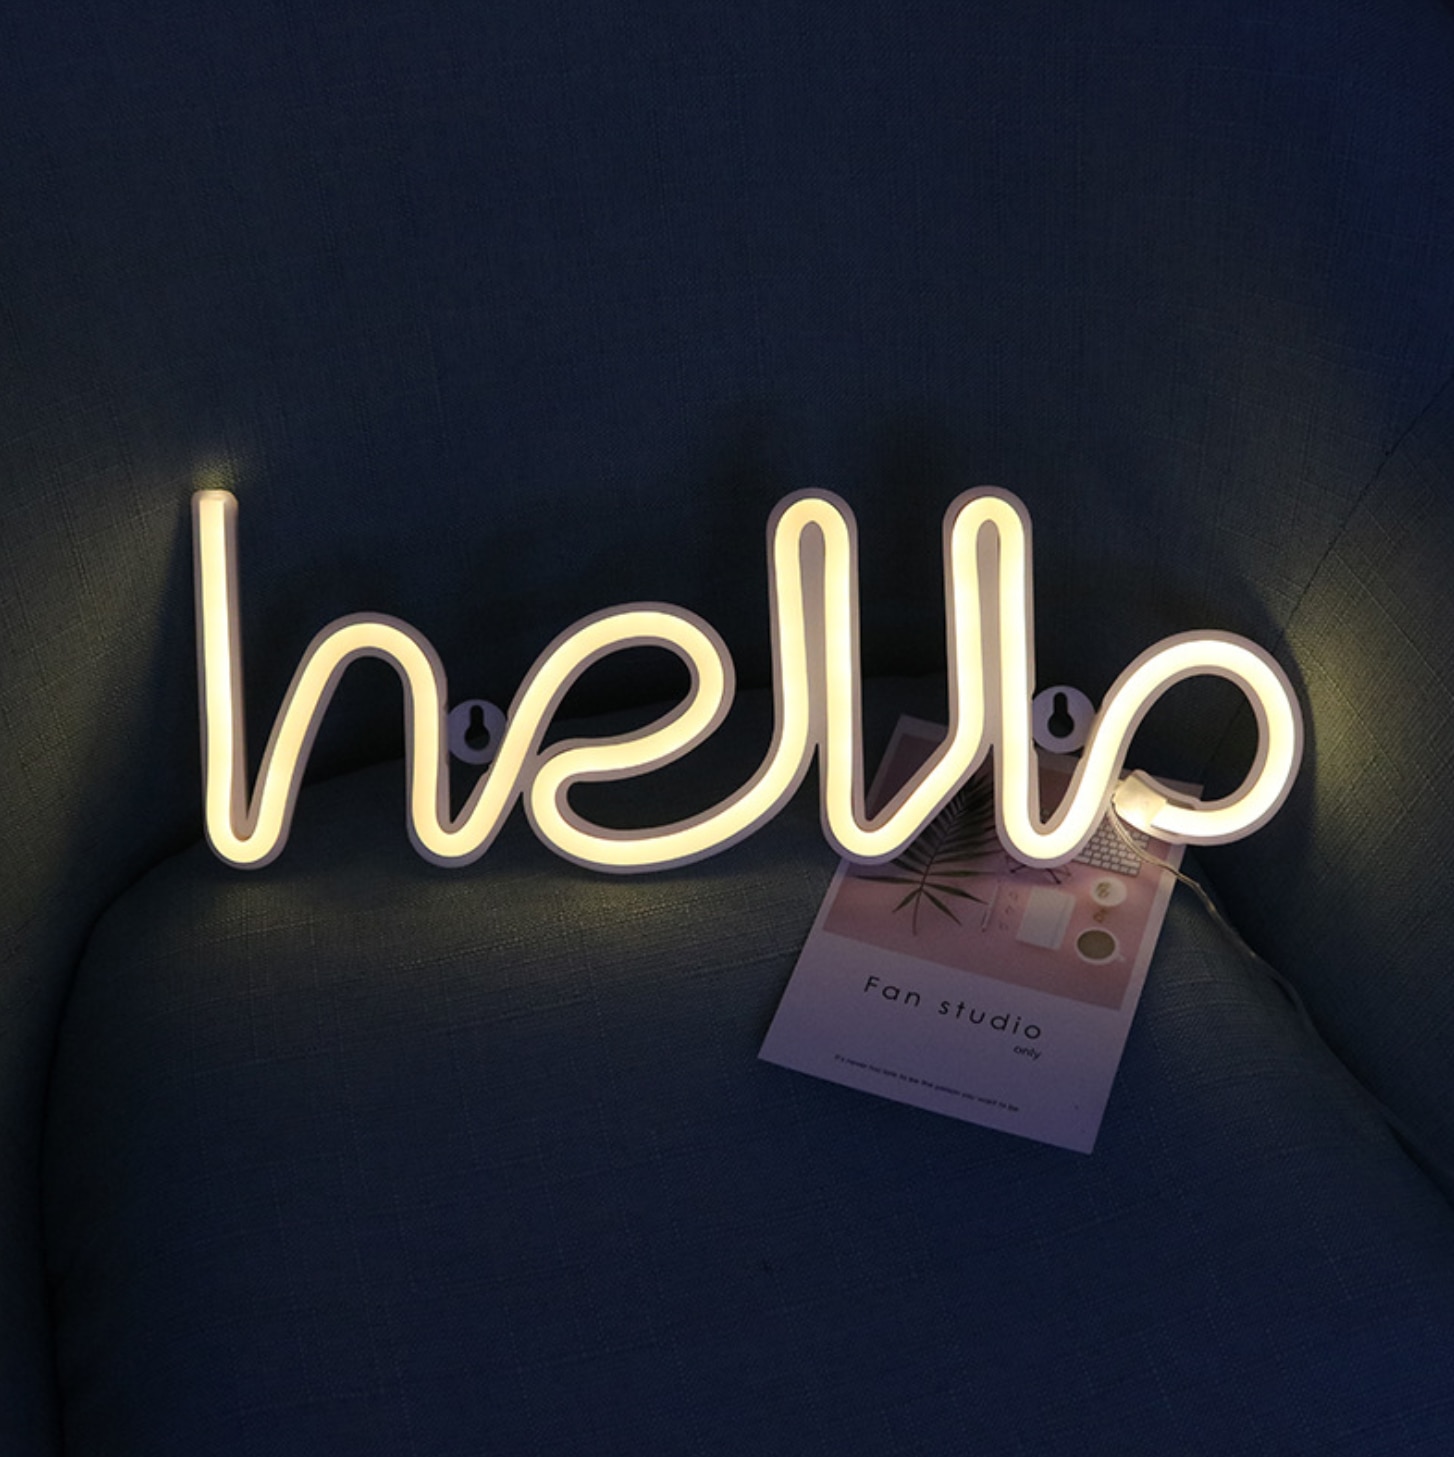 Led Neon Hello Modeling Lamp Decoratieve Led Verlichting Ketting